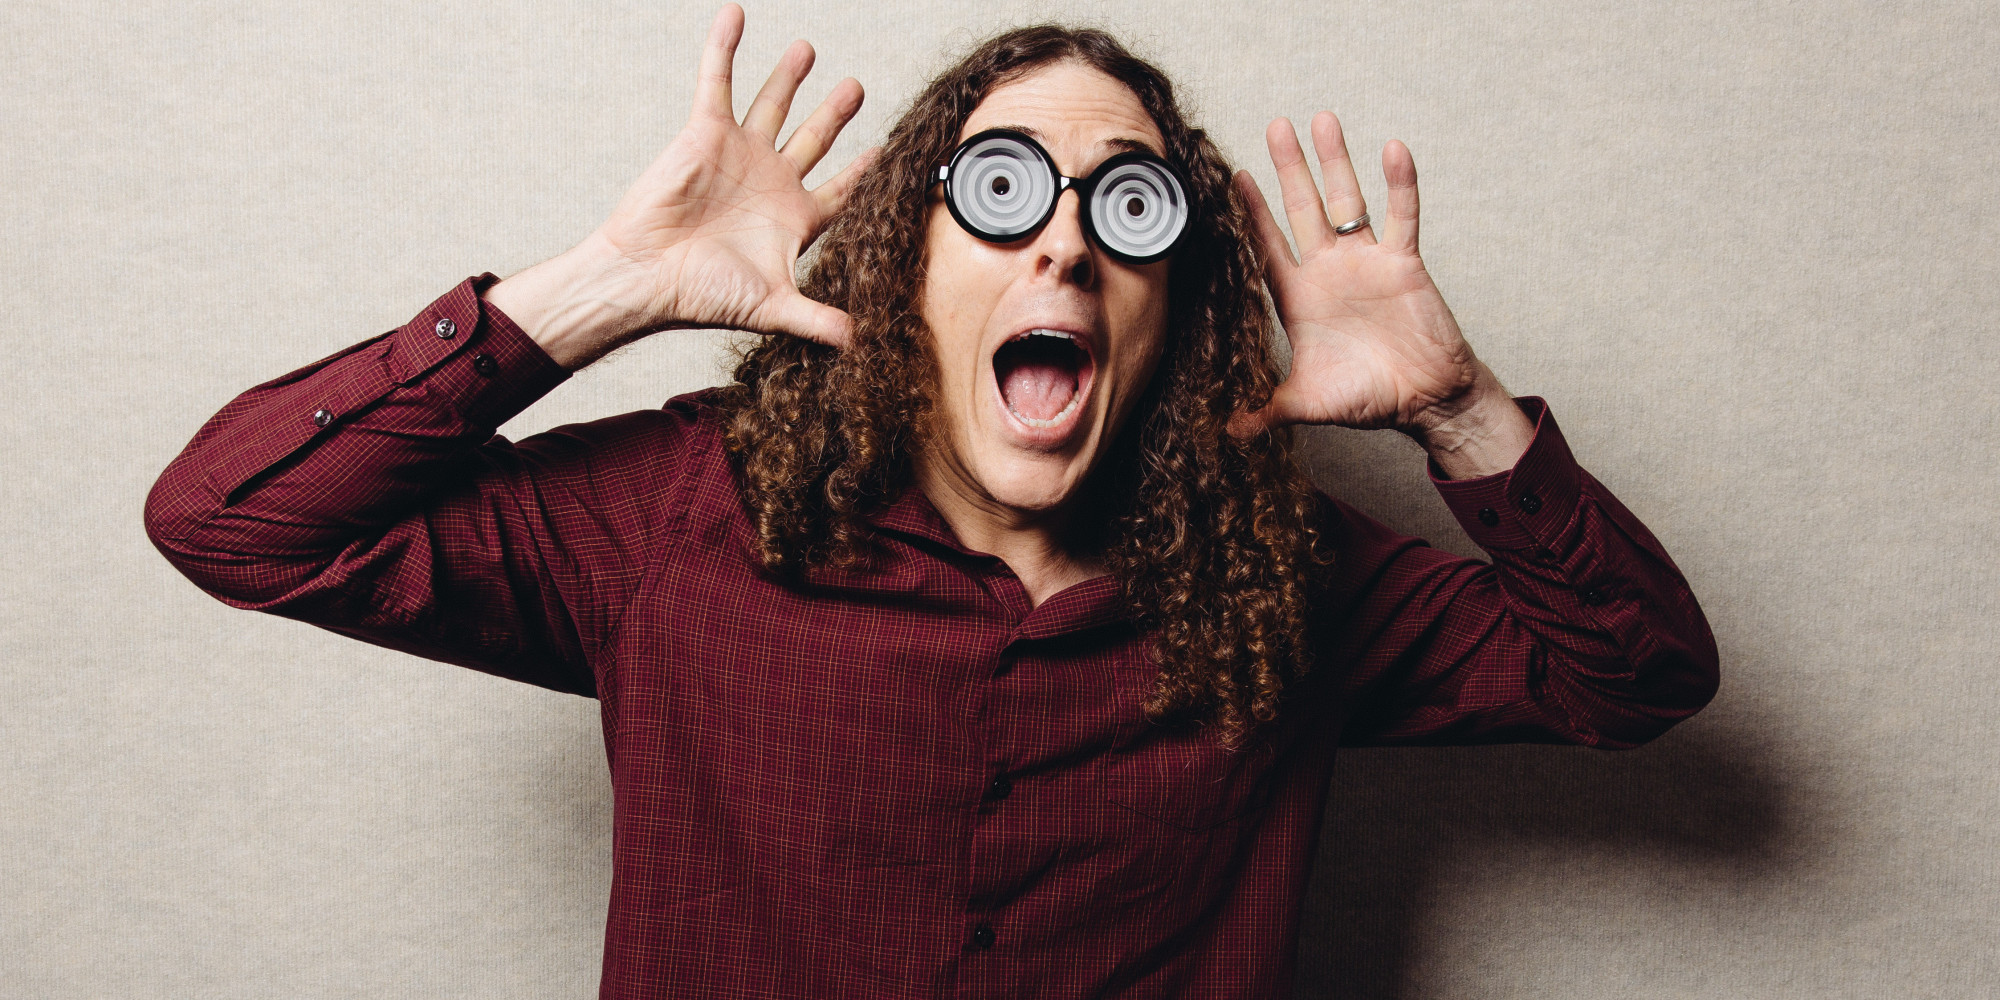 11 Wonderfully Weird Facts You Might Not Know About 'Weird Al' Yankovic